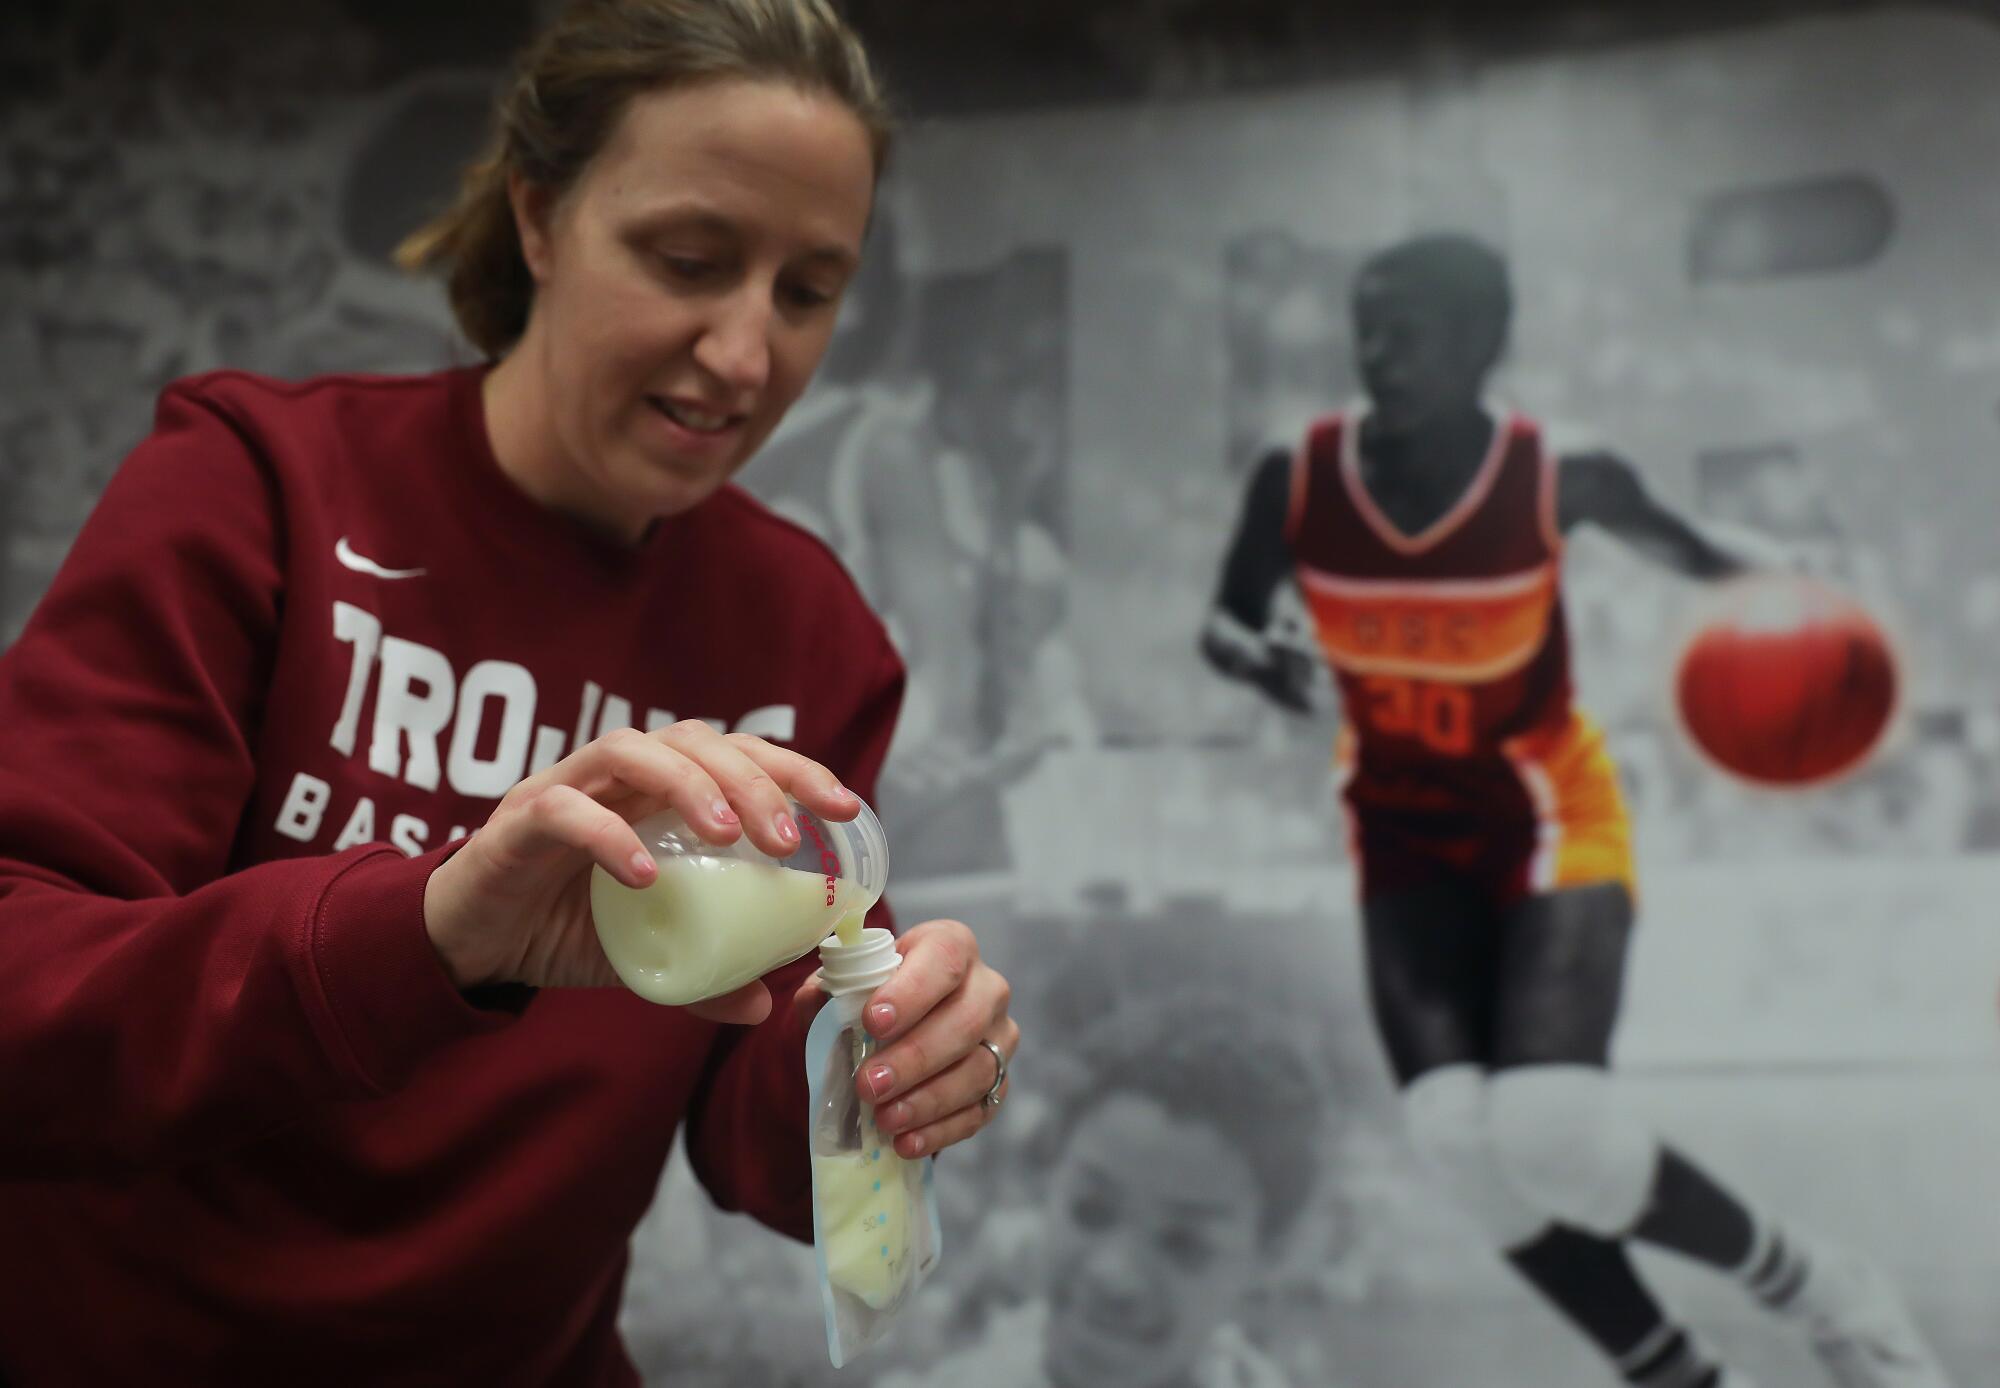 USC women's basketball head coach Lindsay Gottlieb pumps breastmilk in her office during a team practice.